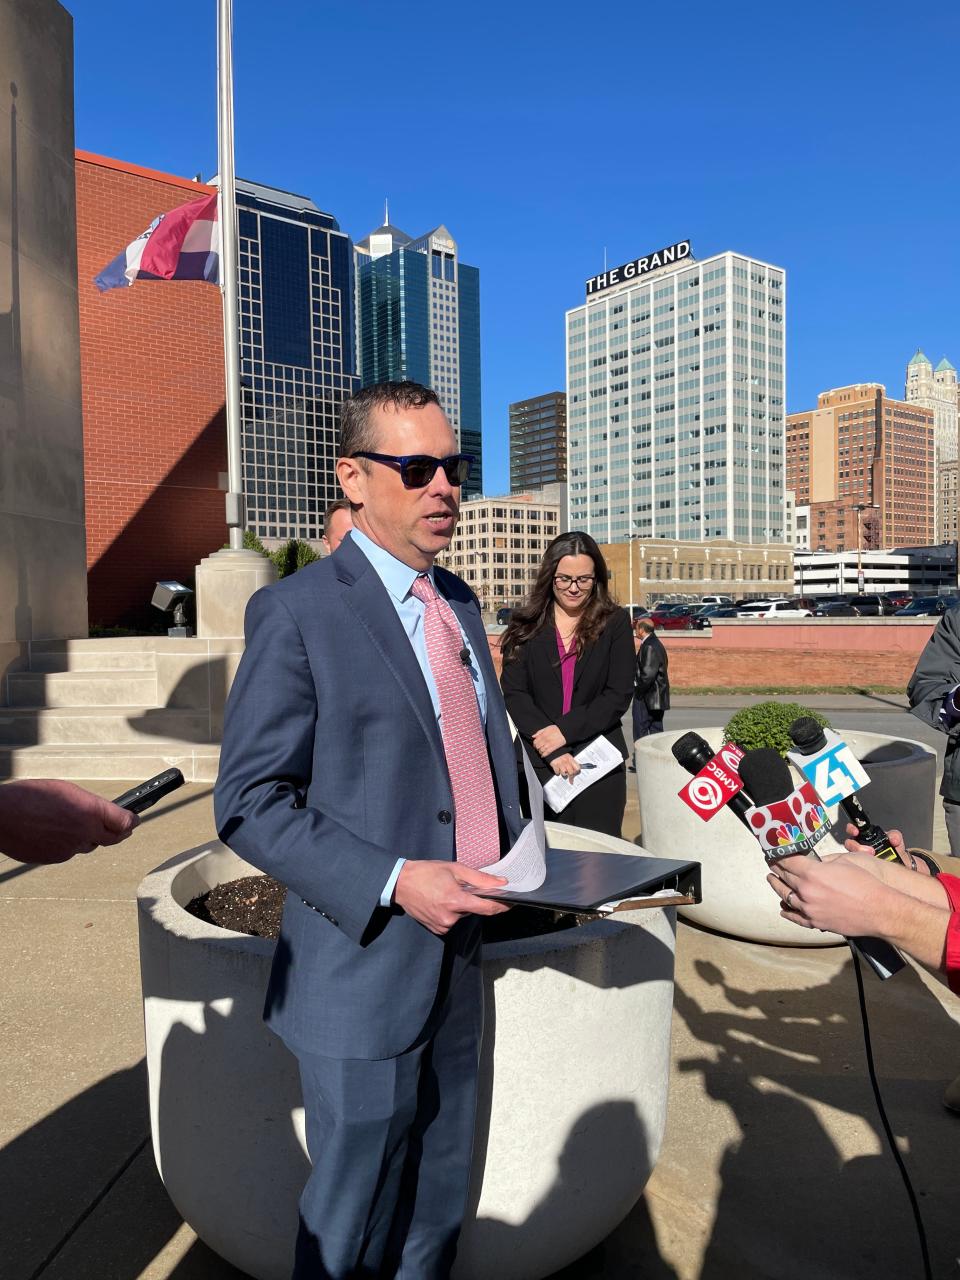 Tony Rothert, attorney for the ACLU of Missouri, speaks to members of the press outside of the Western District Court of Appeals in Kansas City on October 30, 2023. He represents Dr. Anna Fitz-James in a case challenging ballot summary language for abortion-rights petitions.